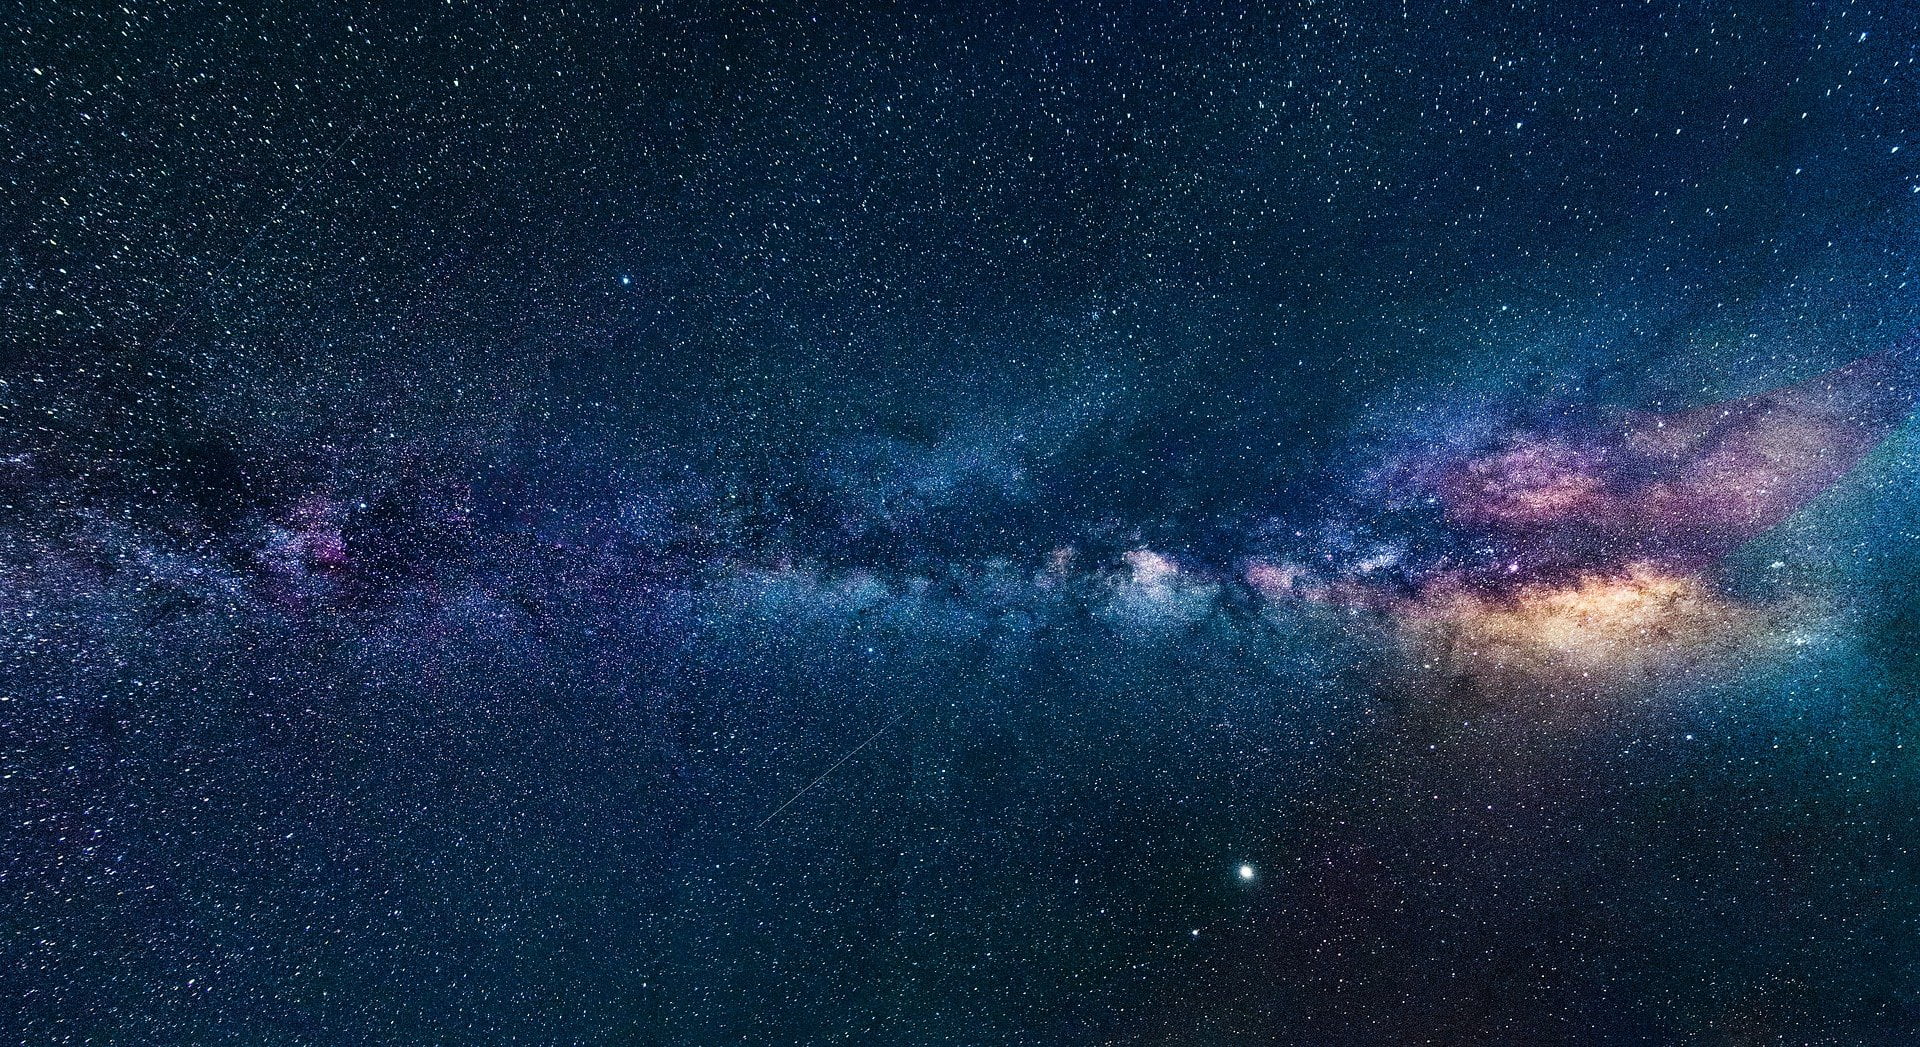 Us In The Milky Way Galaxy | How Small Are We?